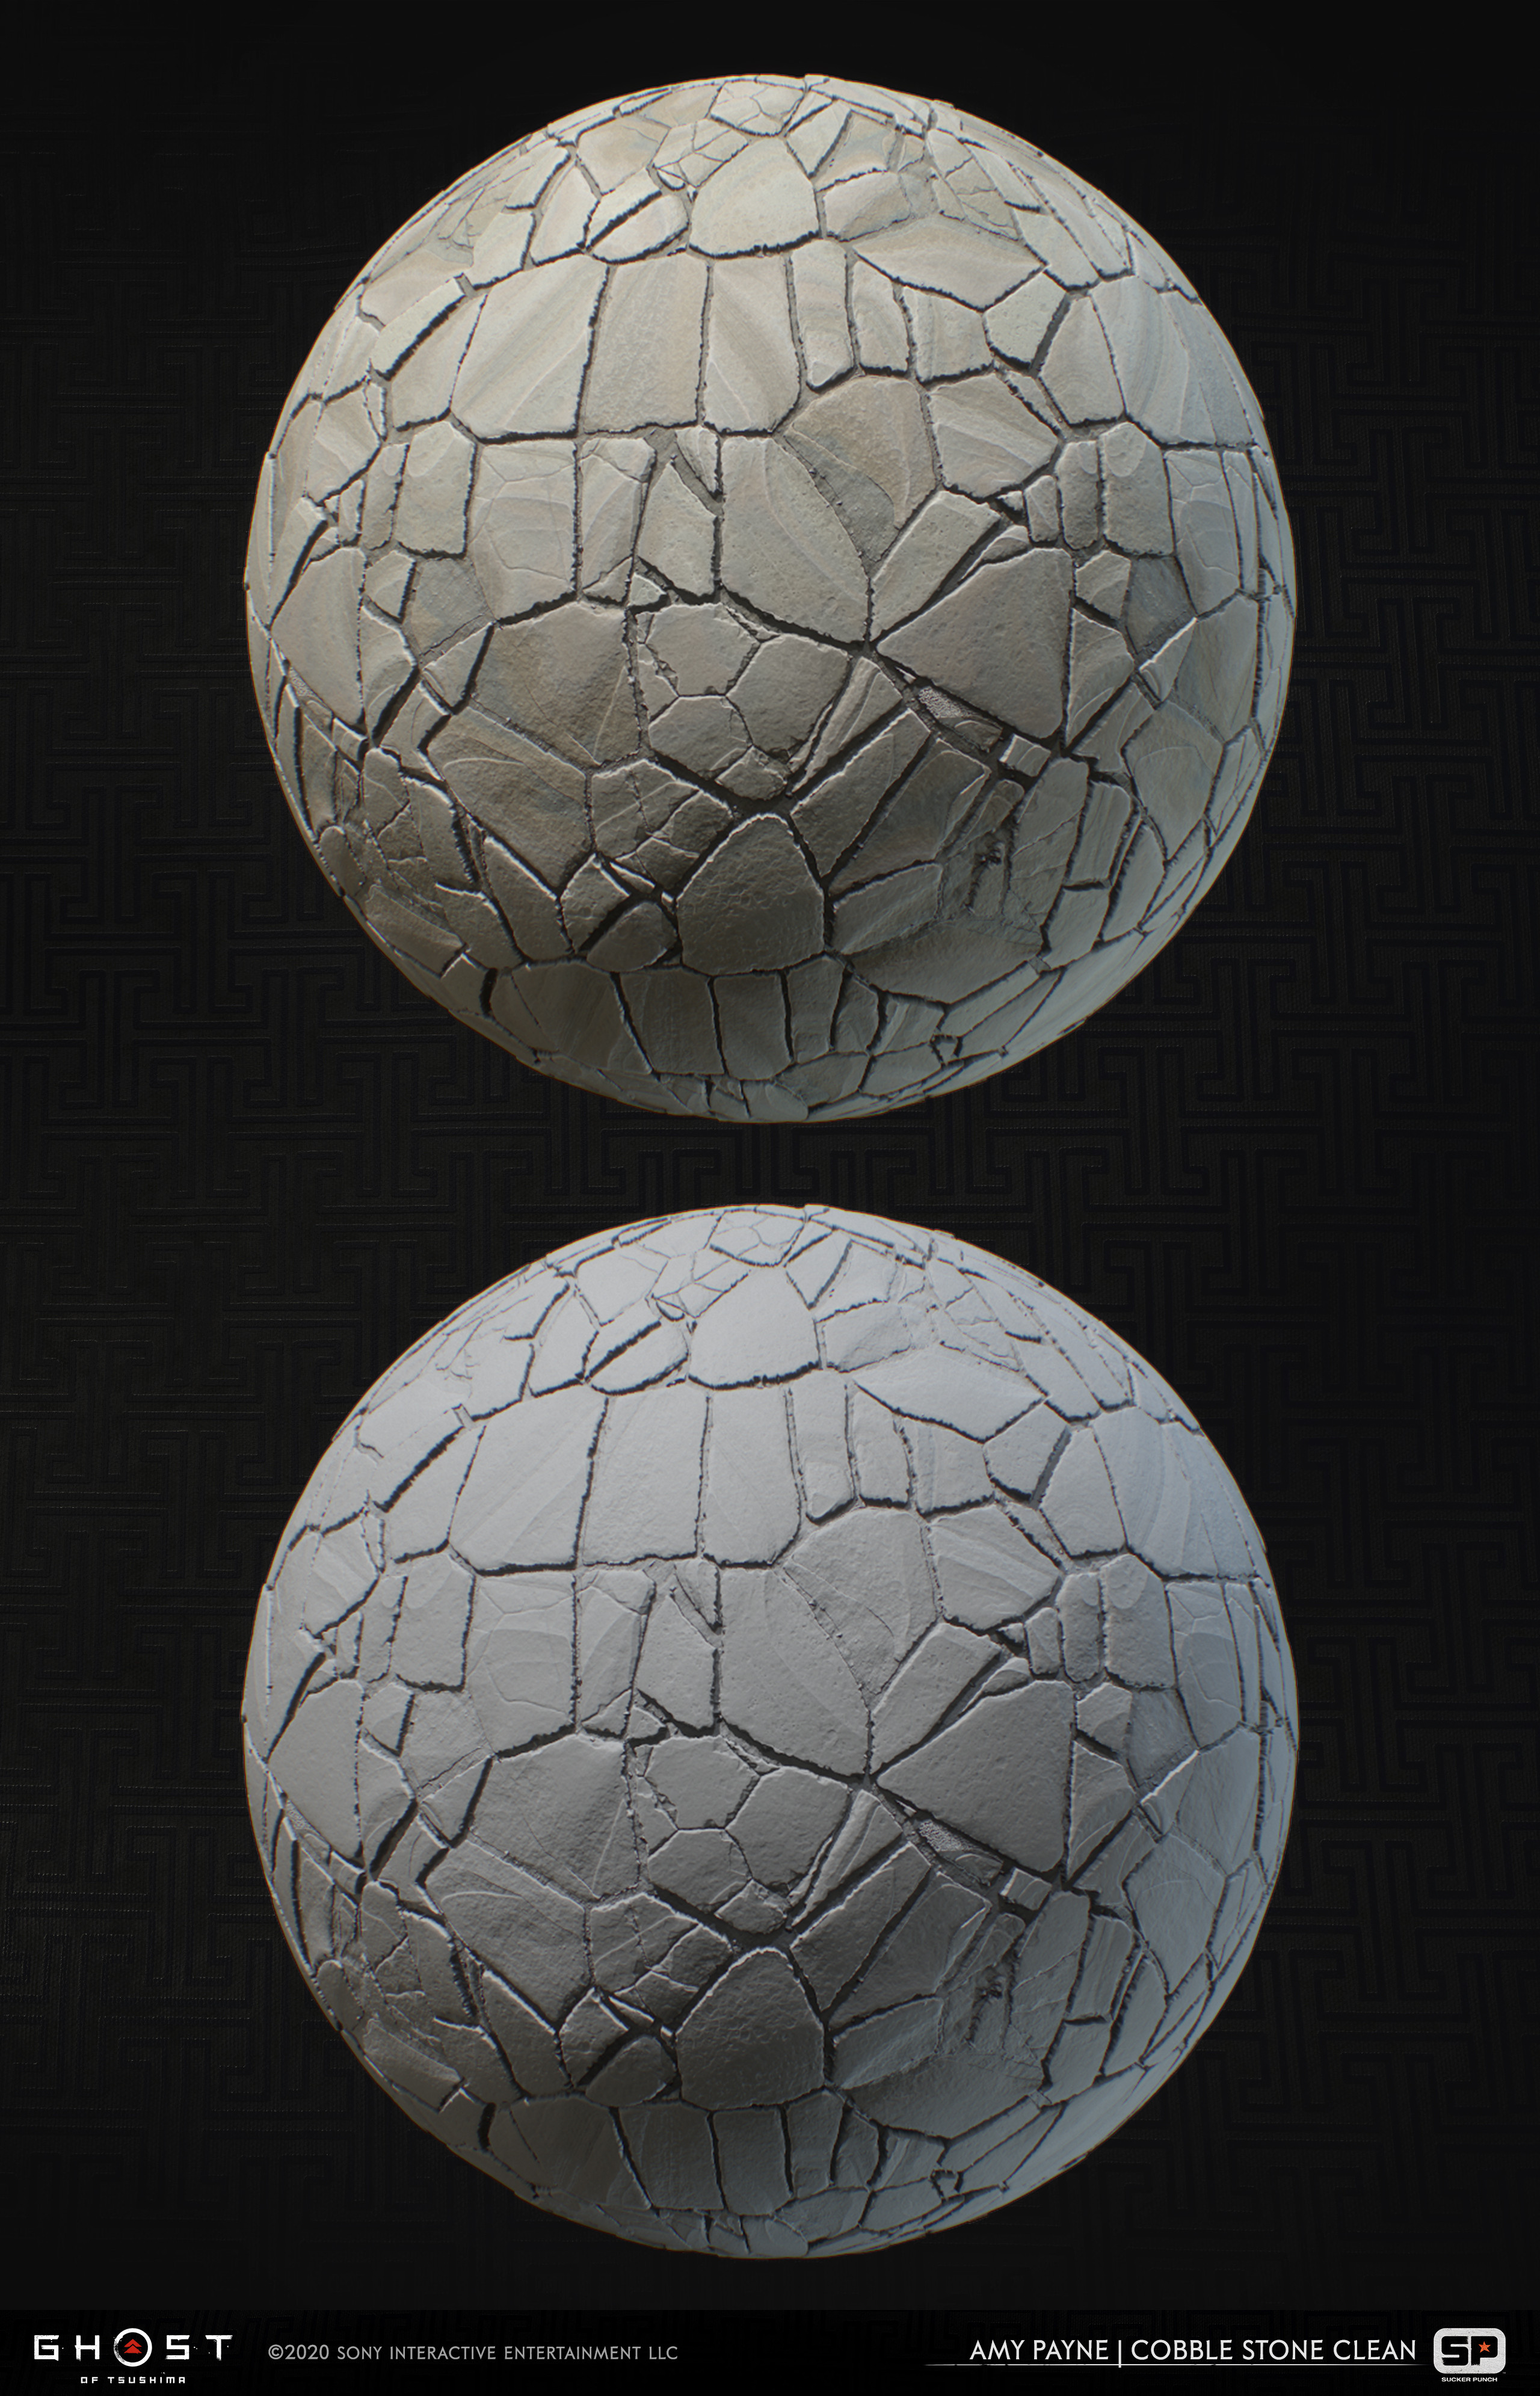 Cobblestone material used throughout the game. 100% Substance Designer.